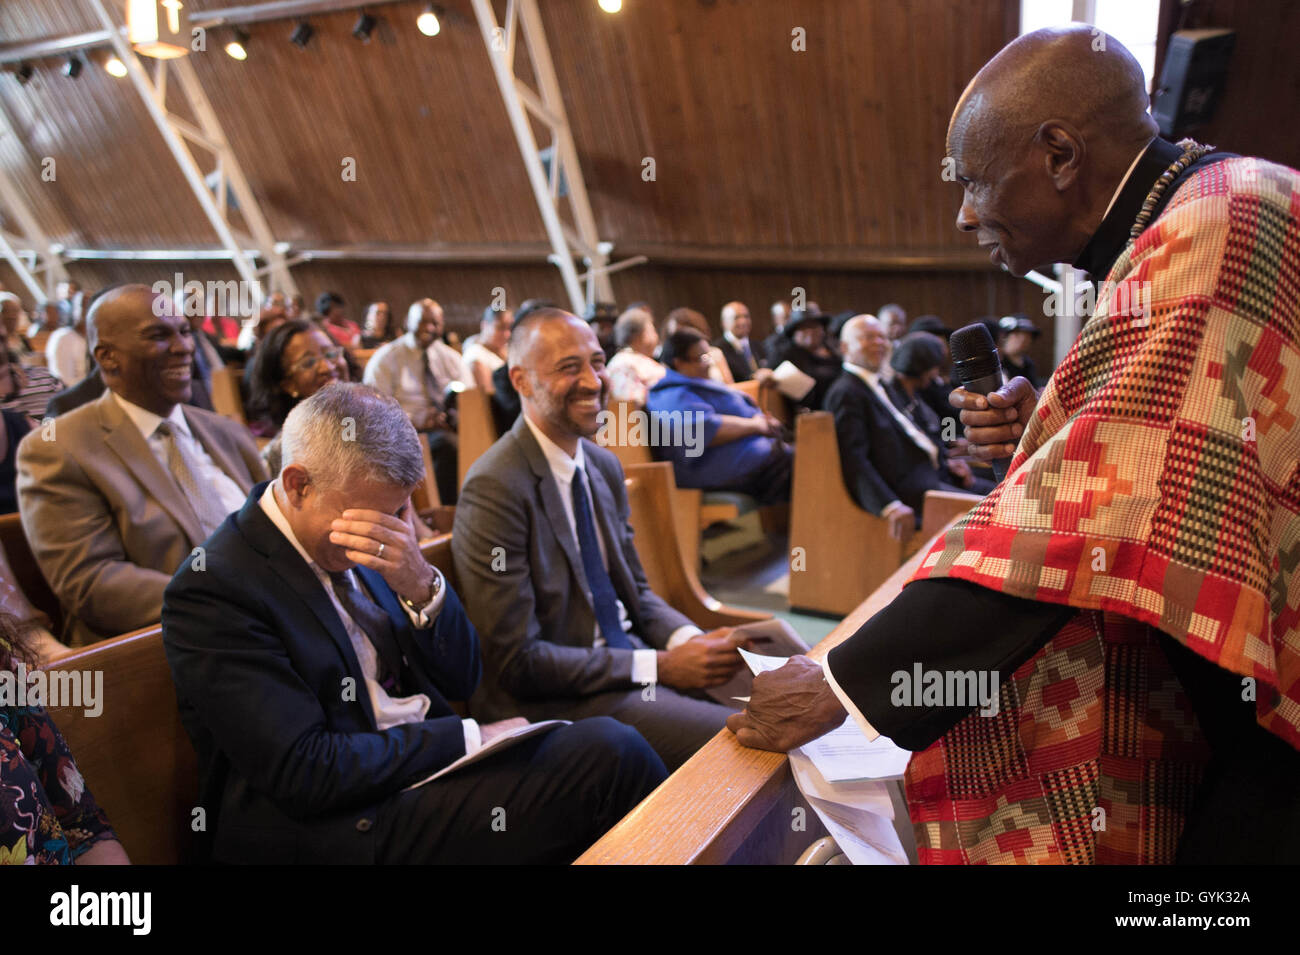 Mayor of London Sadiq Khan (left) laughs as he is introduced to members of the congregation at the St Albans Congregational Church in Queens, New York City (NYC) during a three day visit to the US capital as part of his visit to North America. Stock Photo